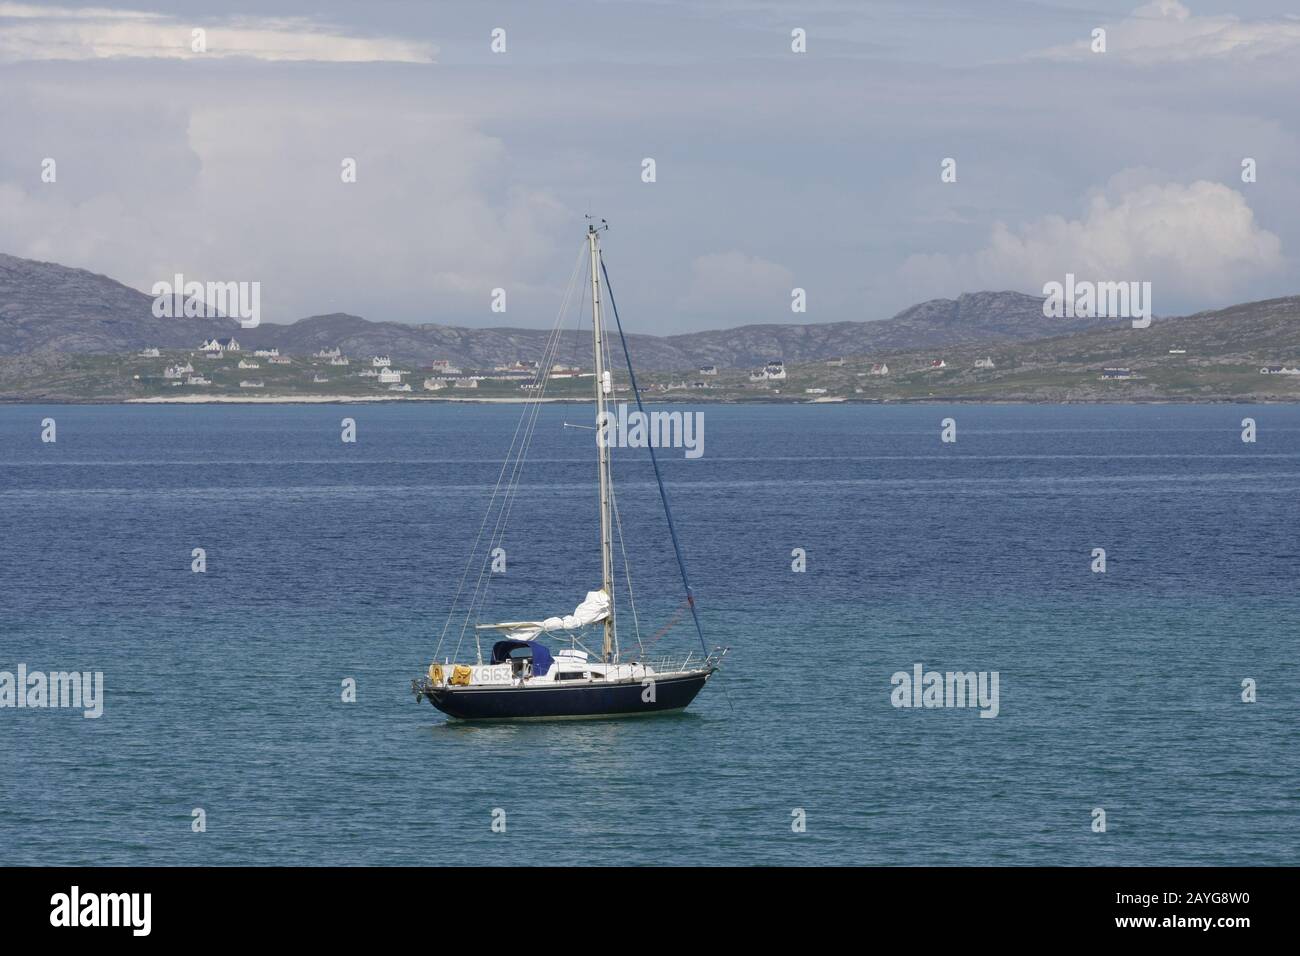 Sailing yacht anchored in the Sound of Barra, looking towards Eriskay, Western Isles, Scotland Stock Photo